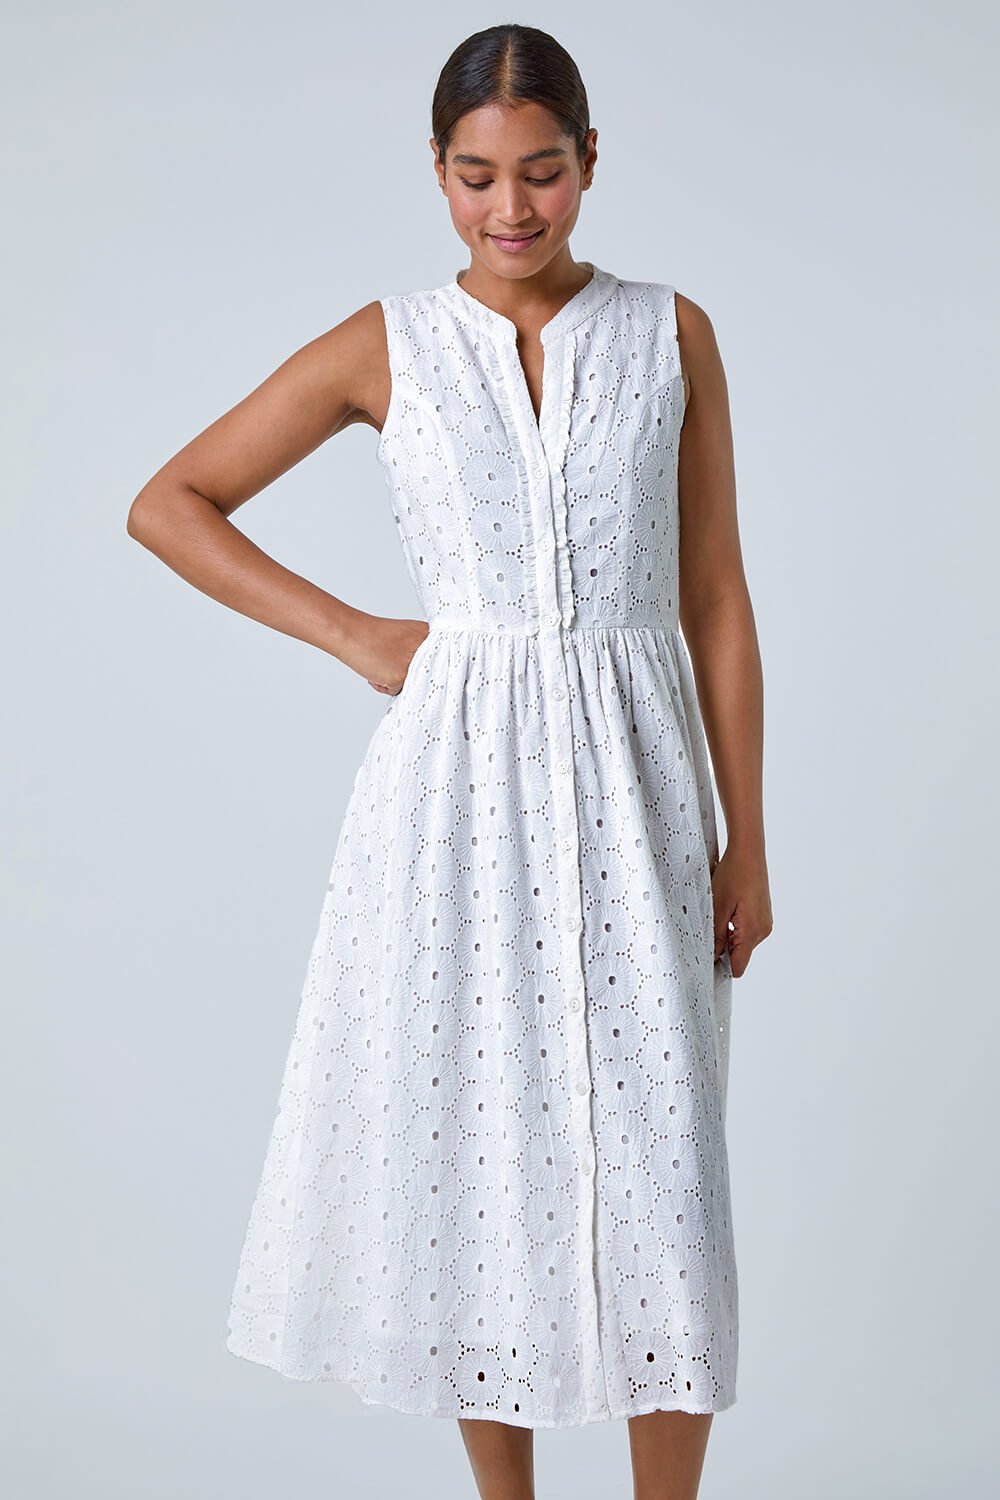 White Floral Cotton Broderie Midi Dress, Image 4 of 5